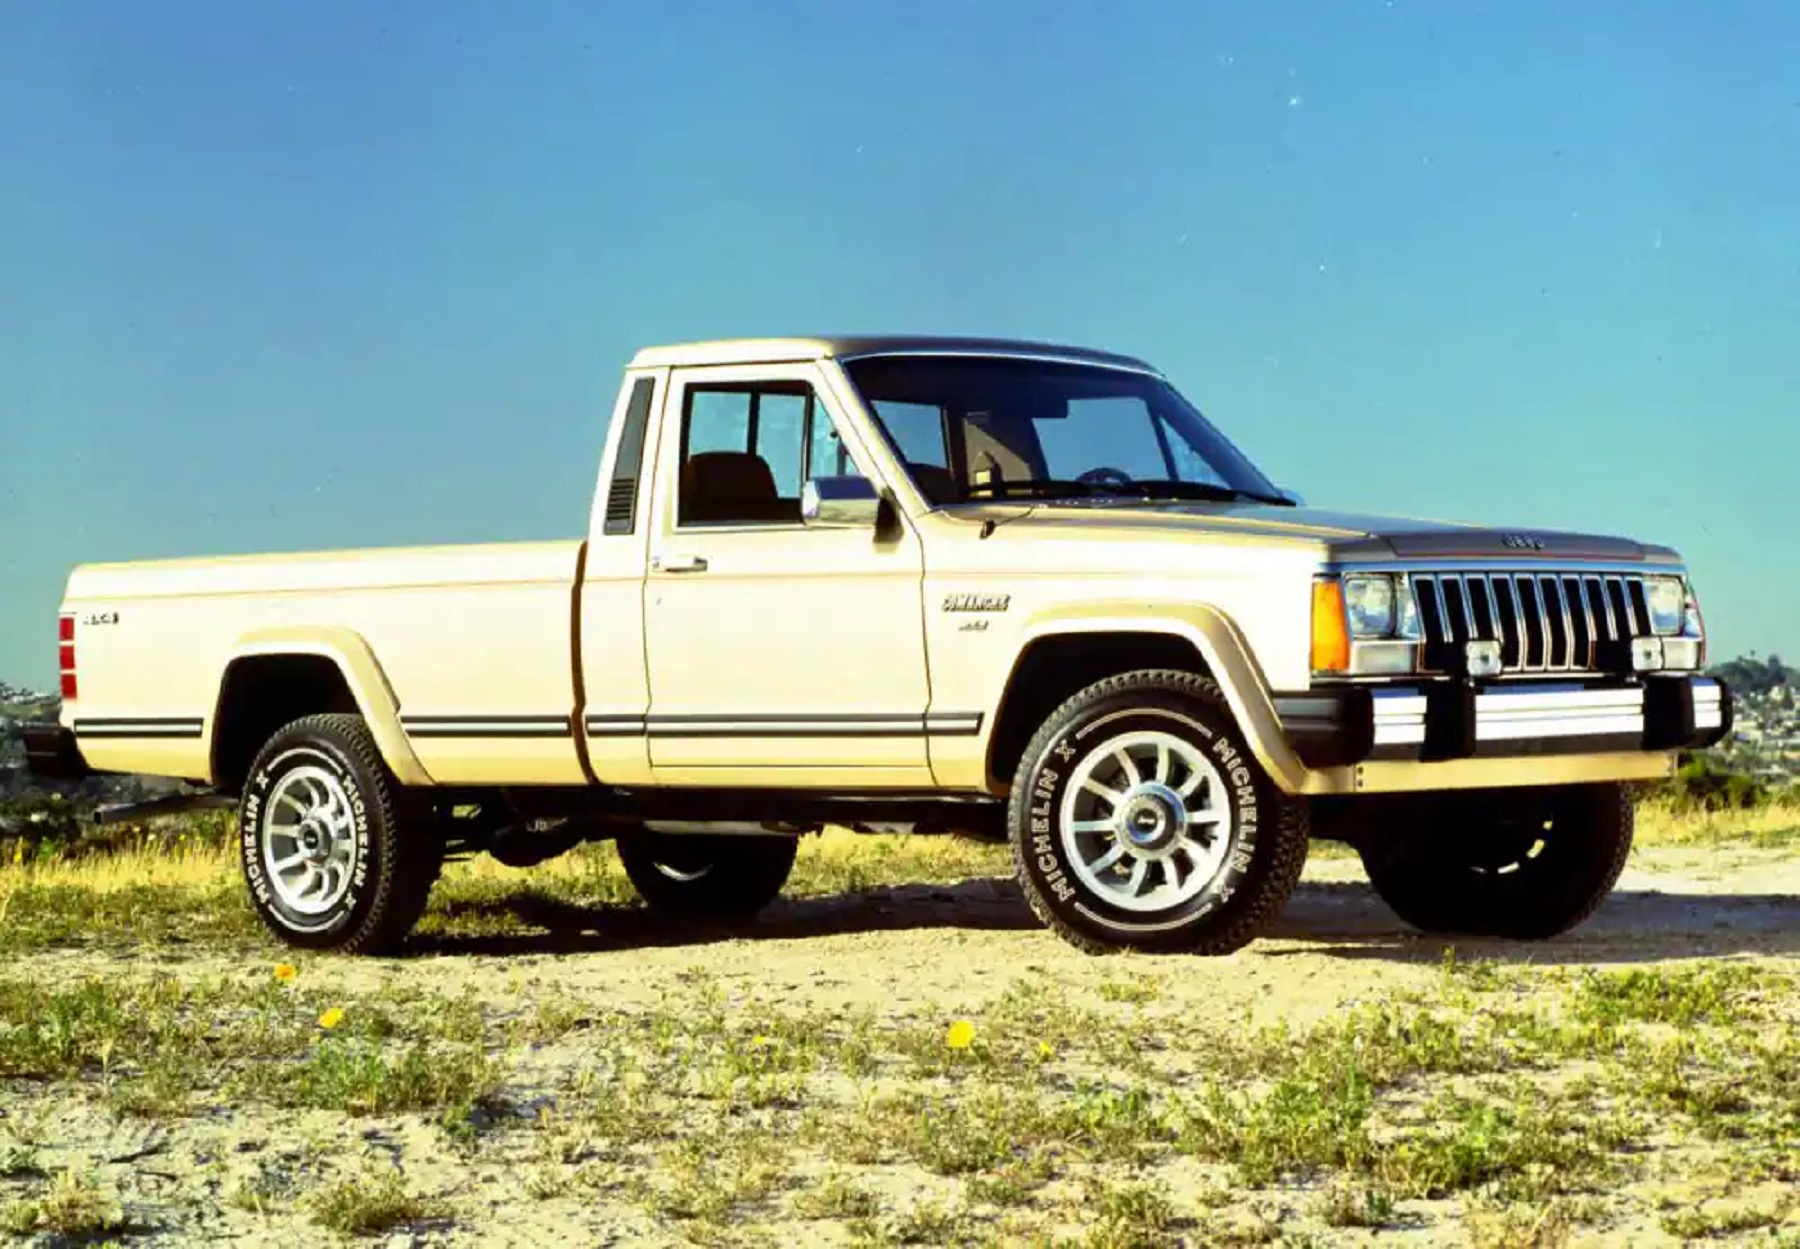 A silver-and-gold Jeep 'MJ' Comanche parked on a sandy grassy hill